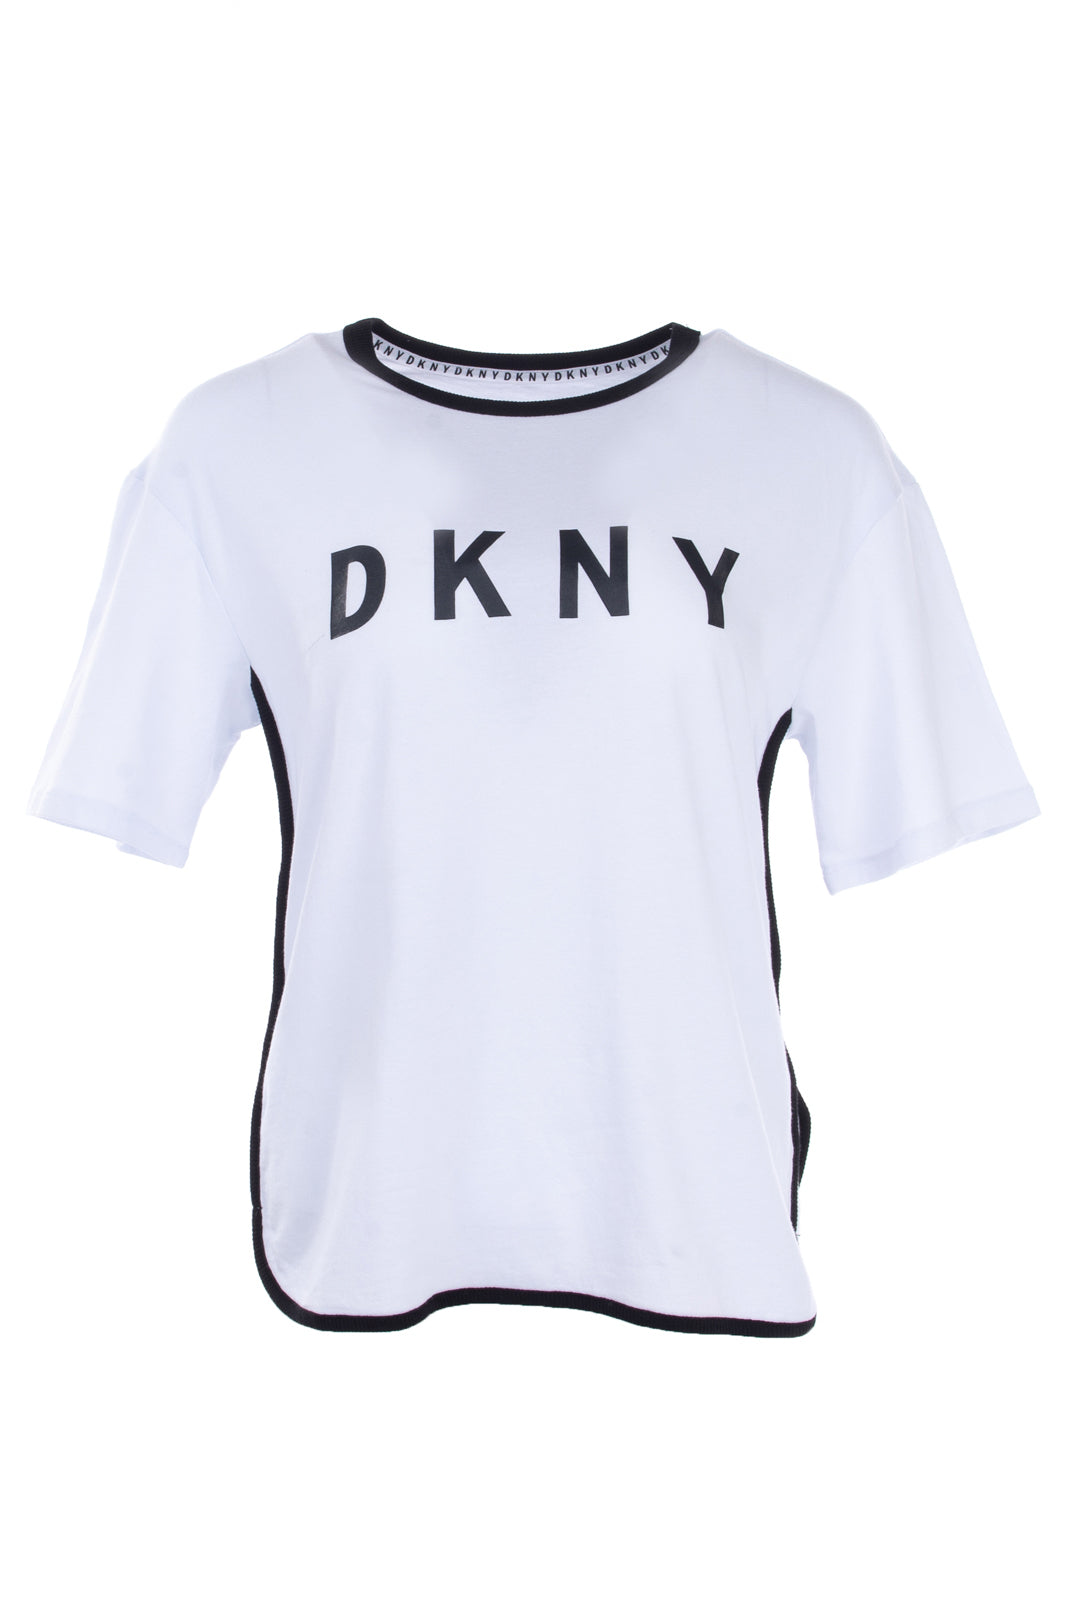 DKNY T-Shirt Top Size XS Coated Logo Front Contrast Piping Short Sleeve Crew gallery main photo